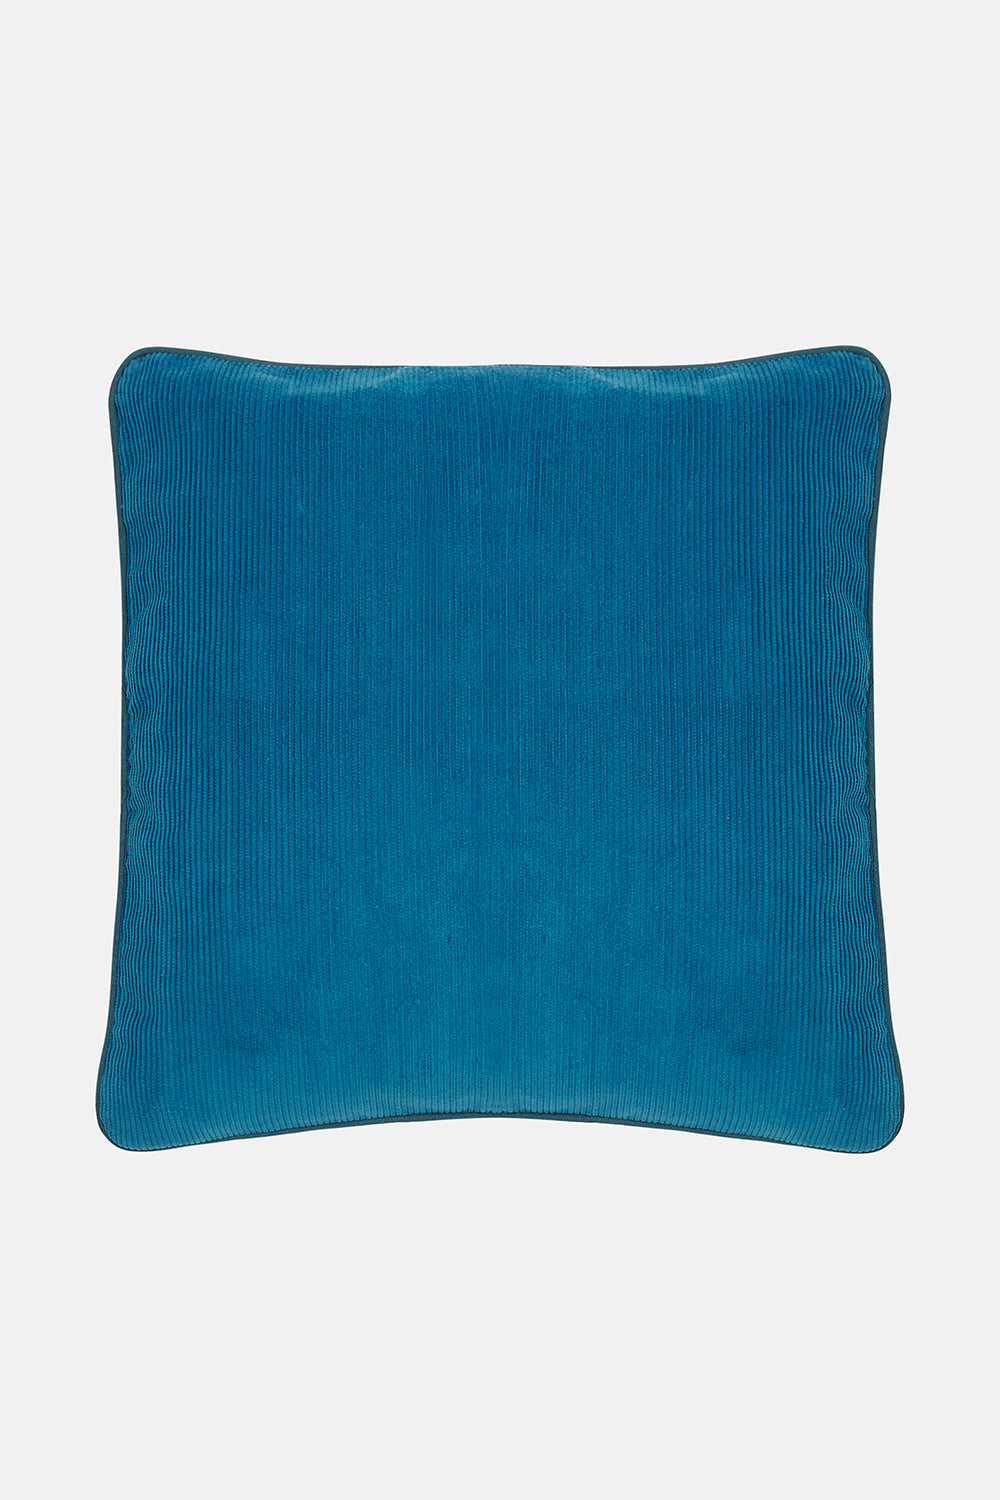 Cushion Cover: DEADSTOCK FABRIC - Cobalt Blue